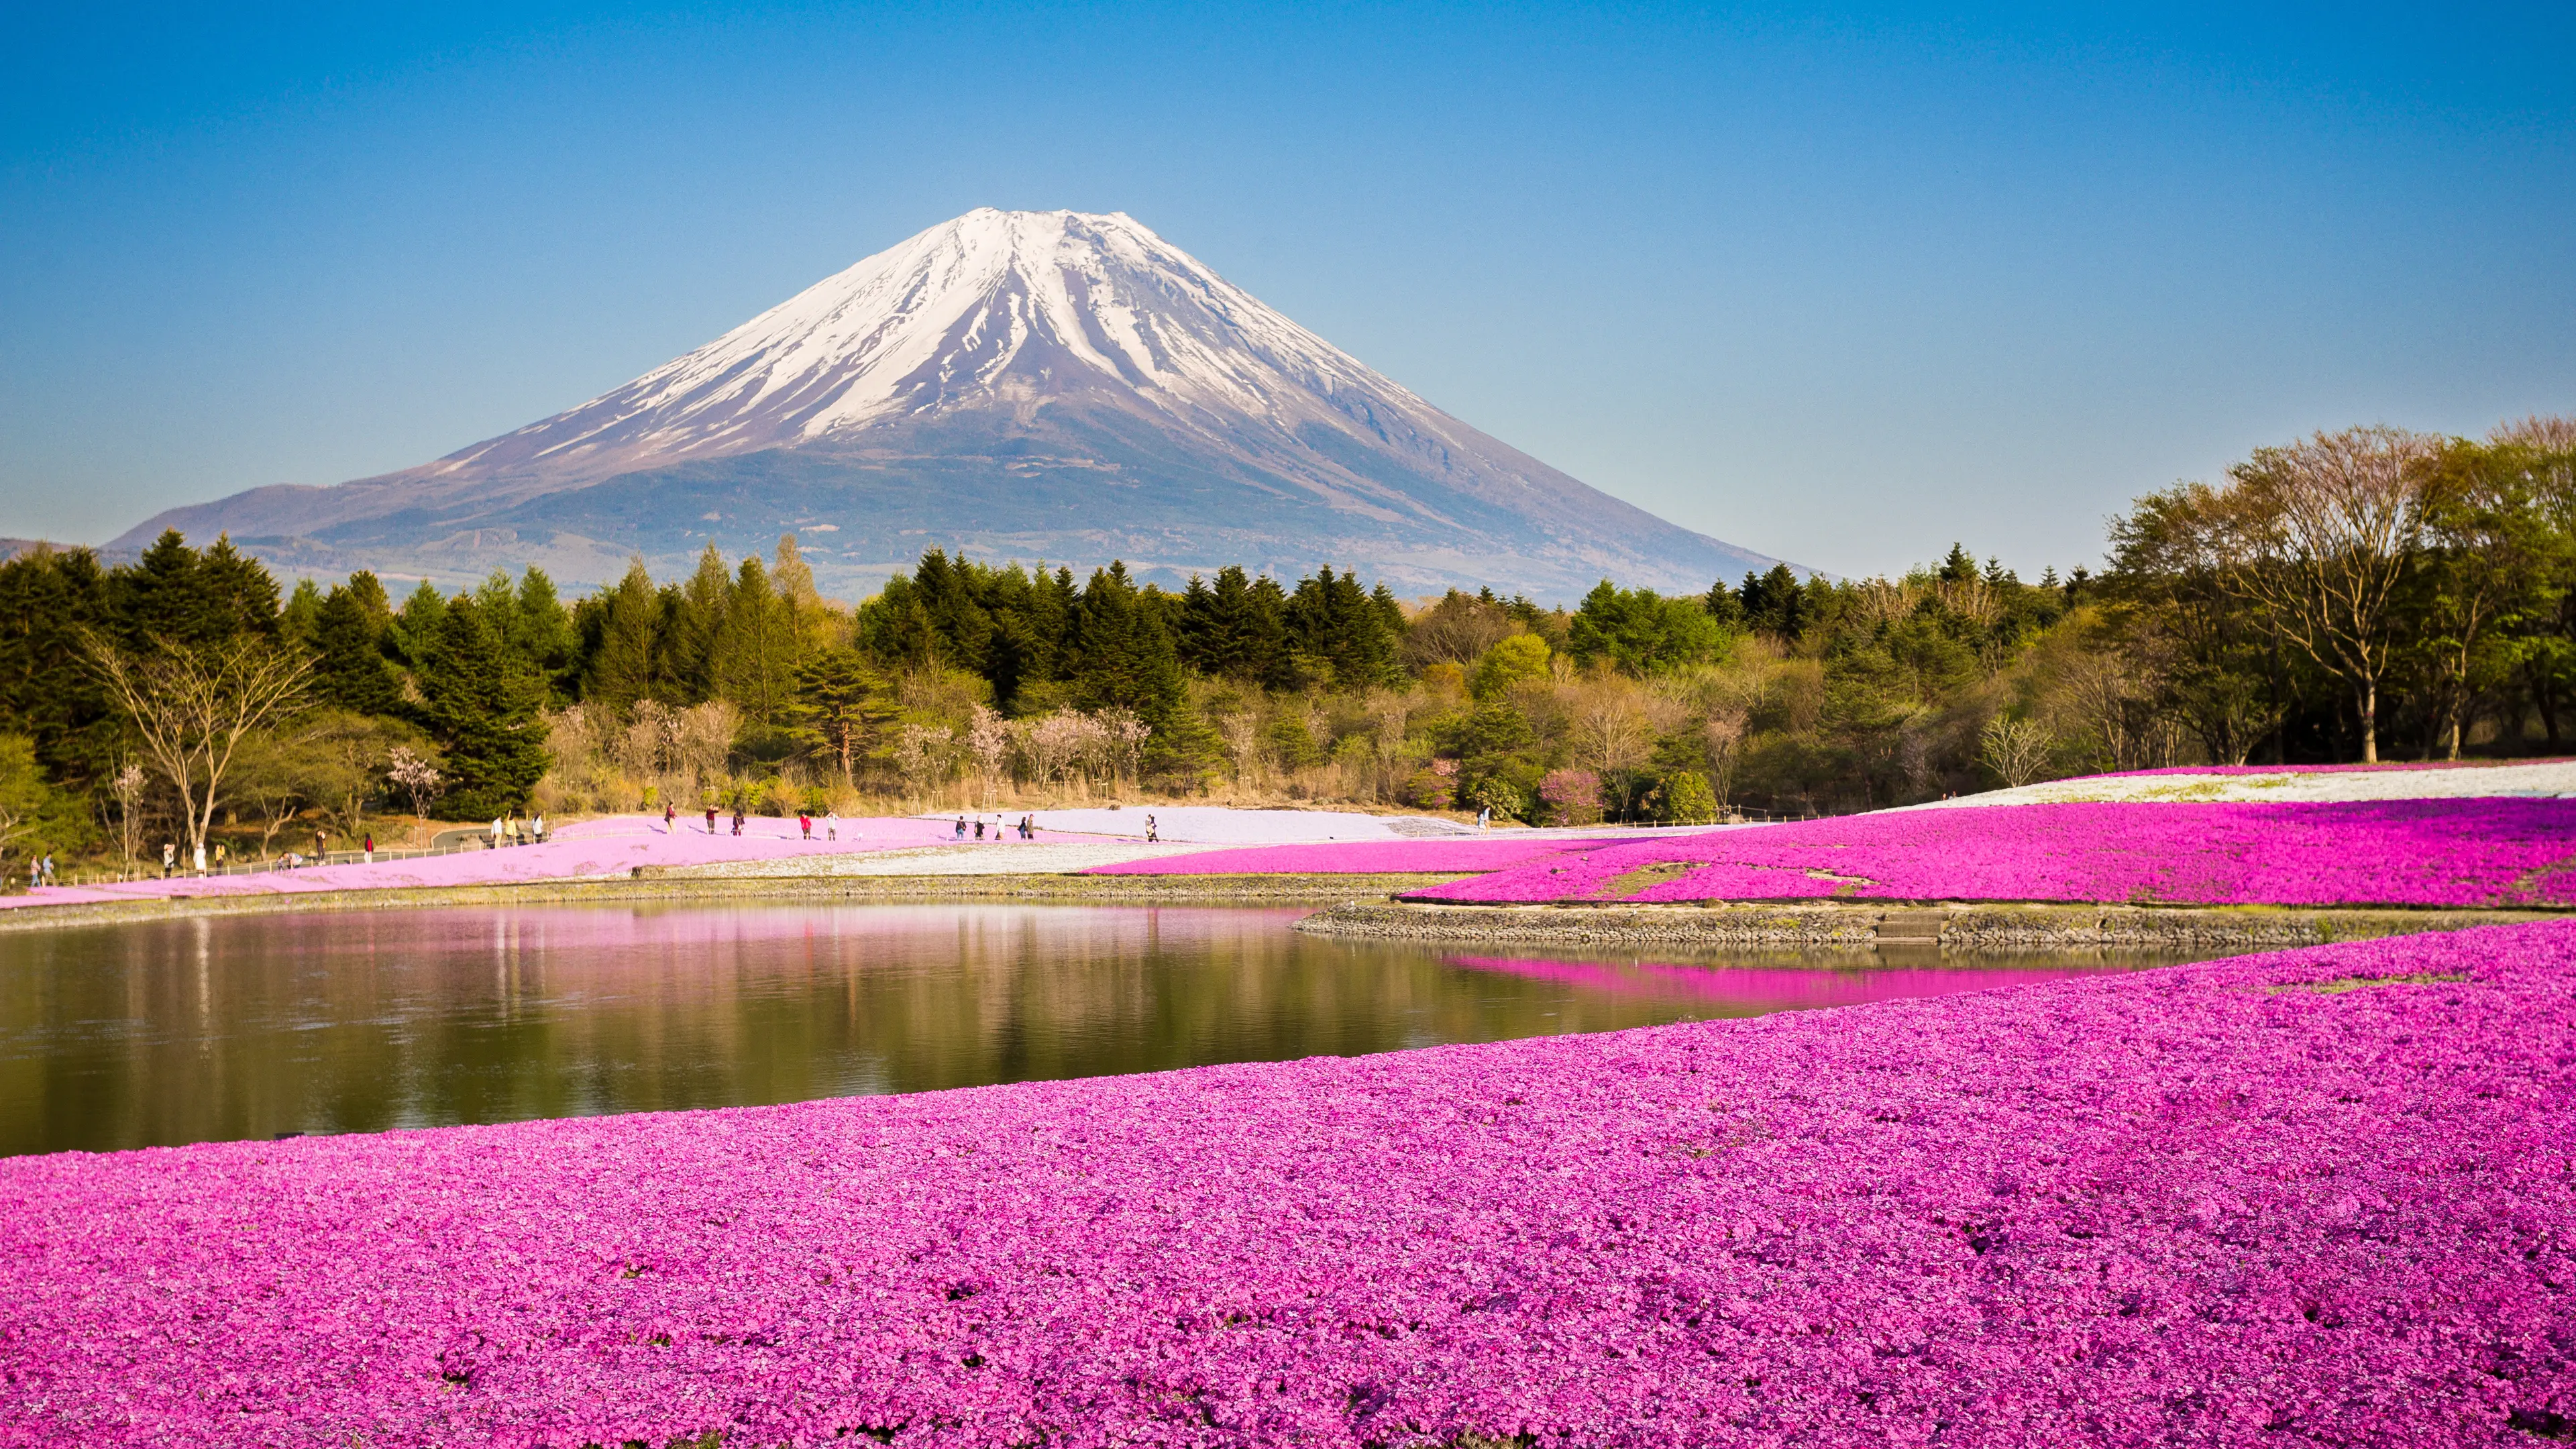 1-Day Adventure: Unexplored Sights for Couples at Mount Fuji